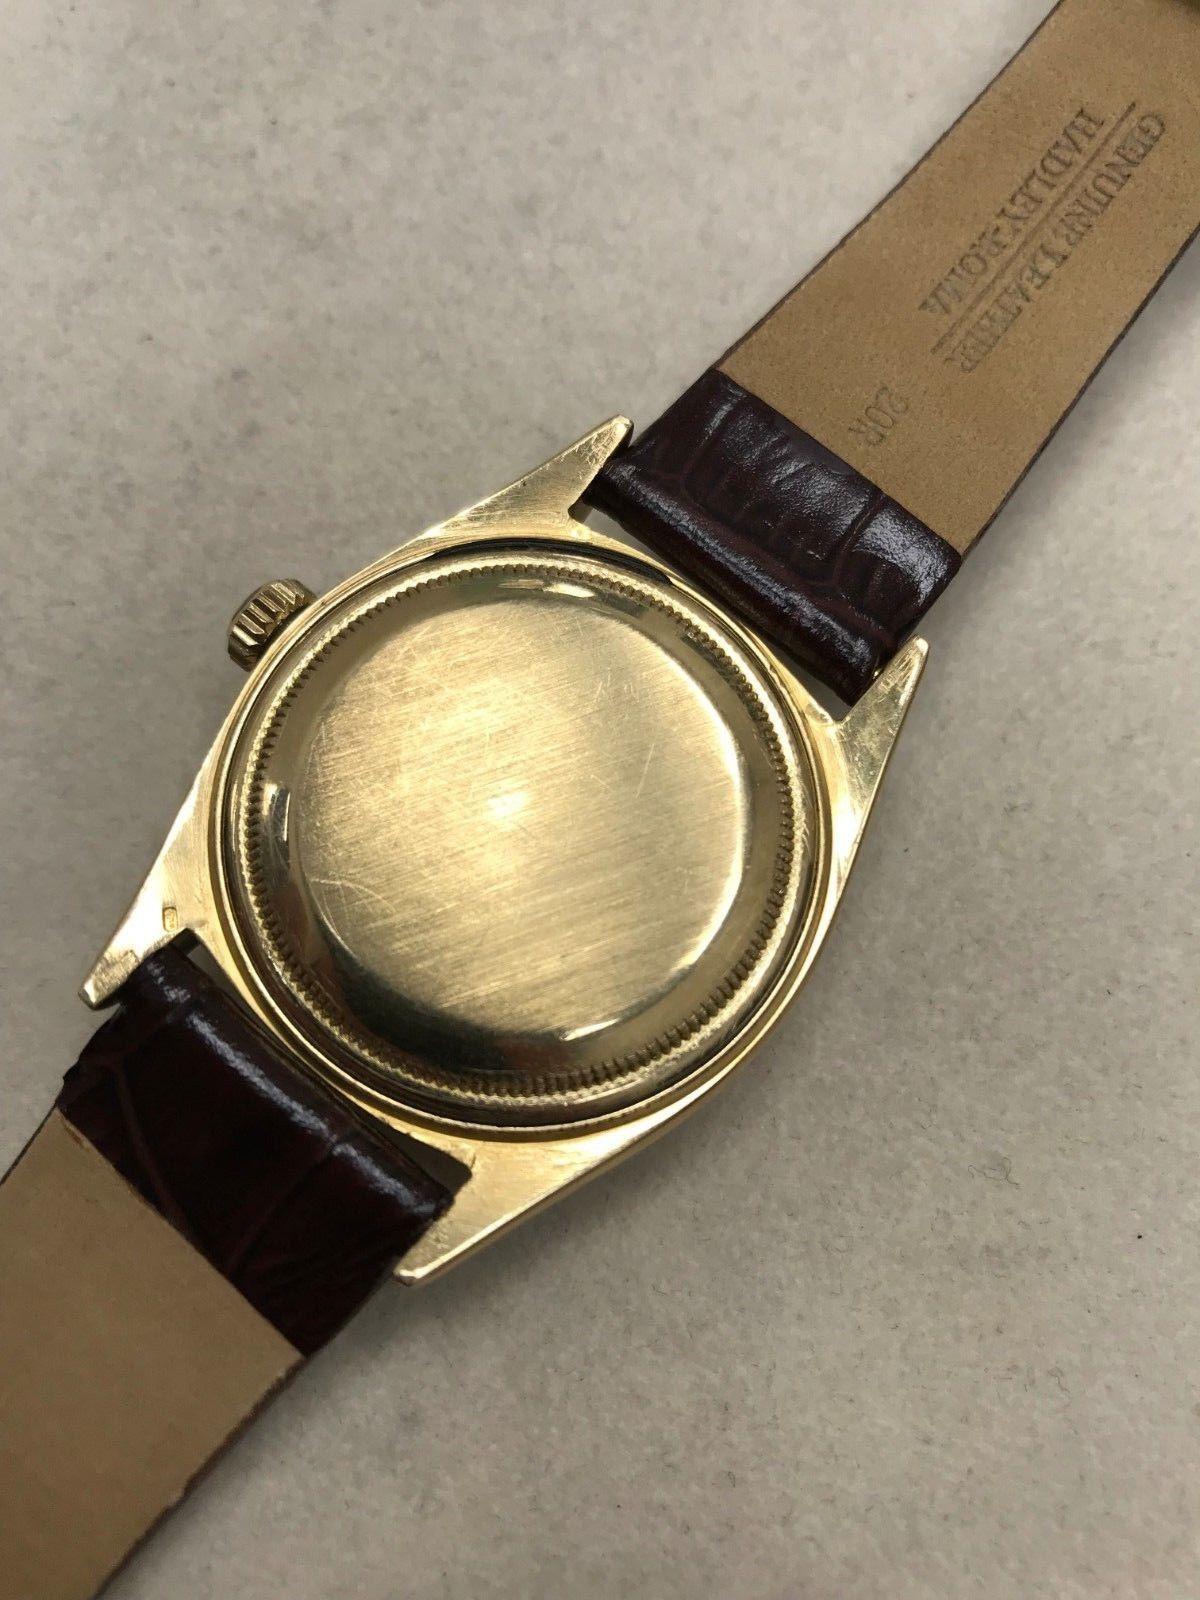 1959 Rare Vintage Rolex President Day Date 6611 Diamond Dial 18 Karat Gold In Good Condition For Sale In San Diego, CA